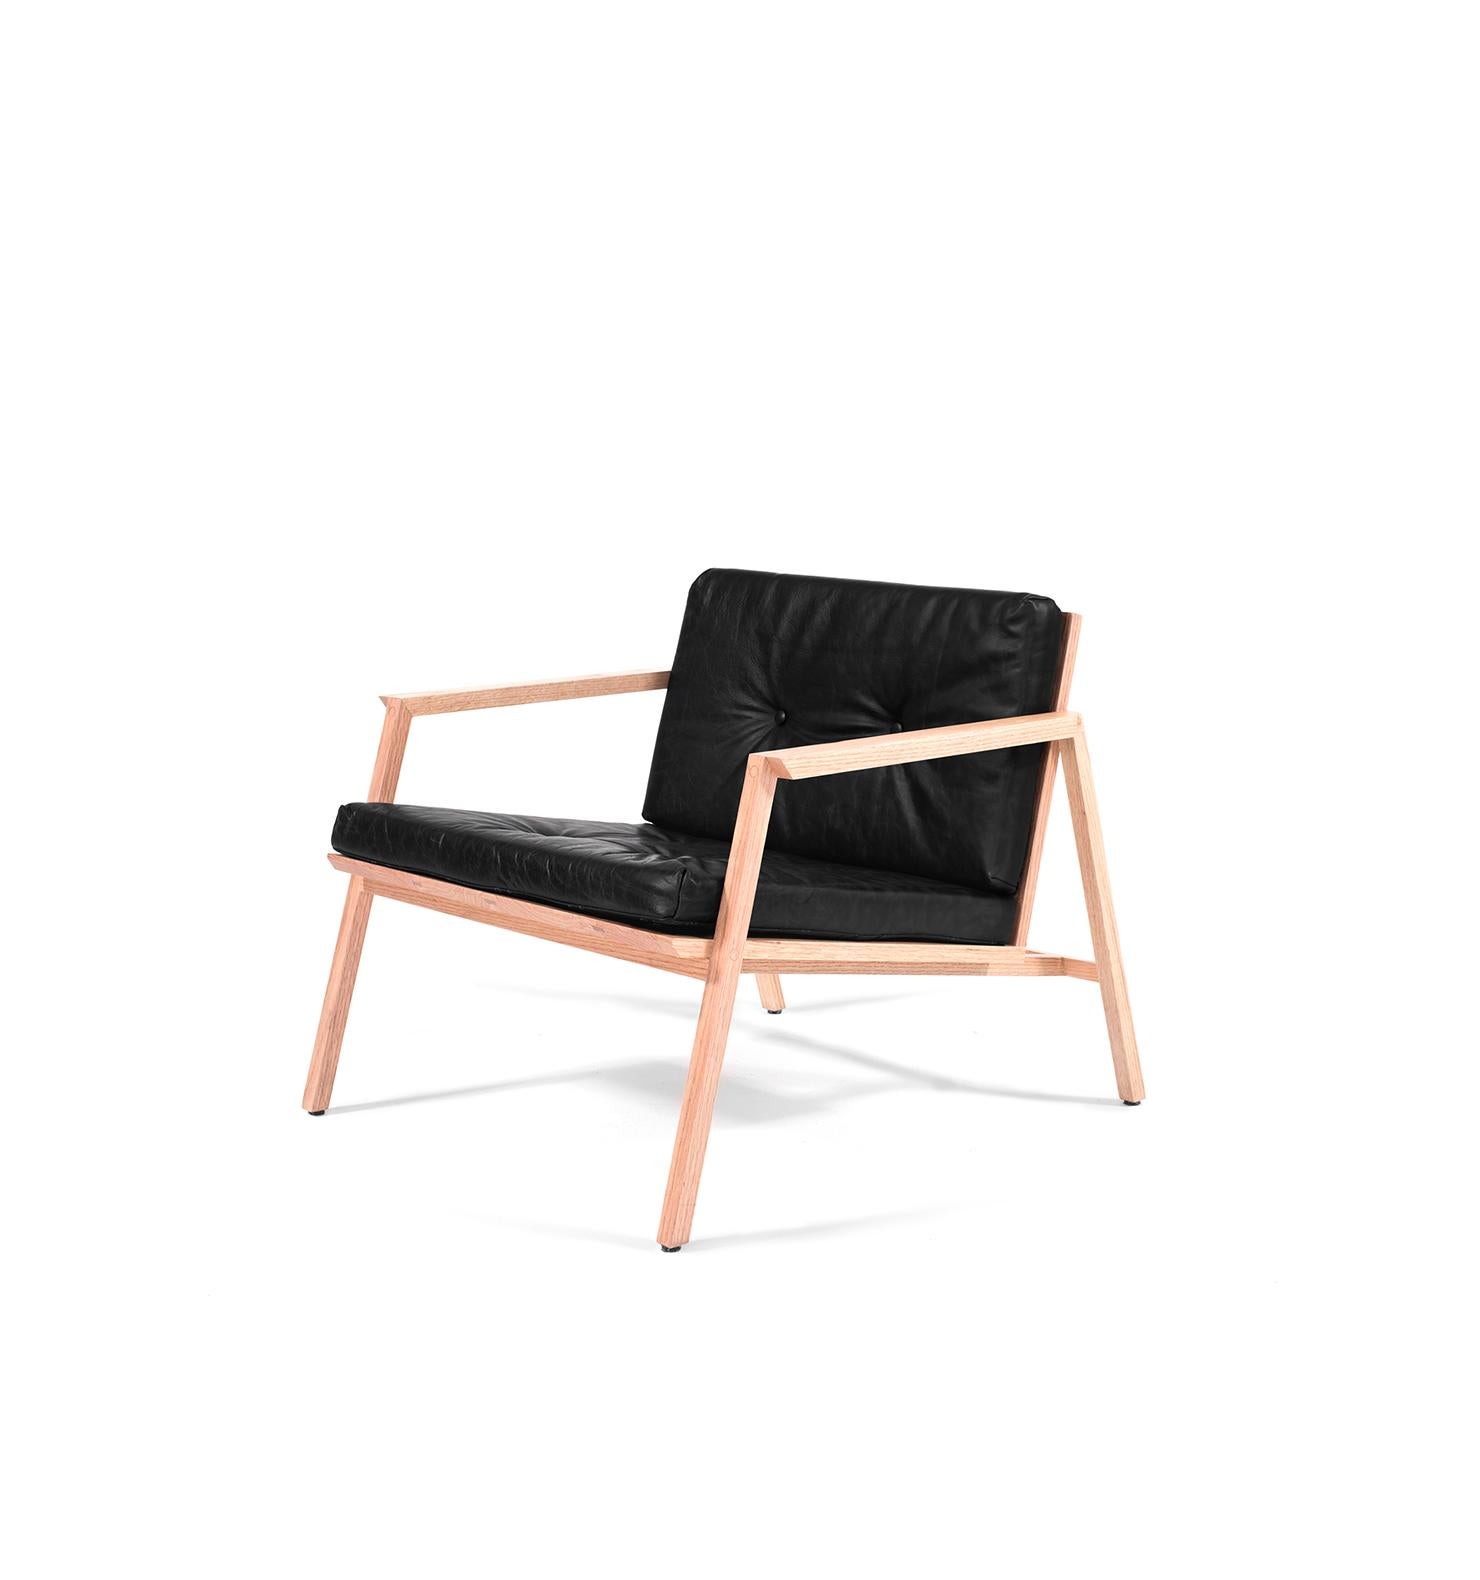 Tumbona Dedo, Mexican Contemporary Lounge Chair by Emiliano Molina for CUCHARA For Sale 9